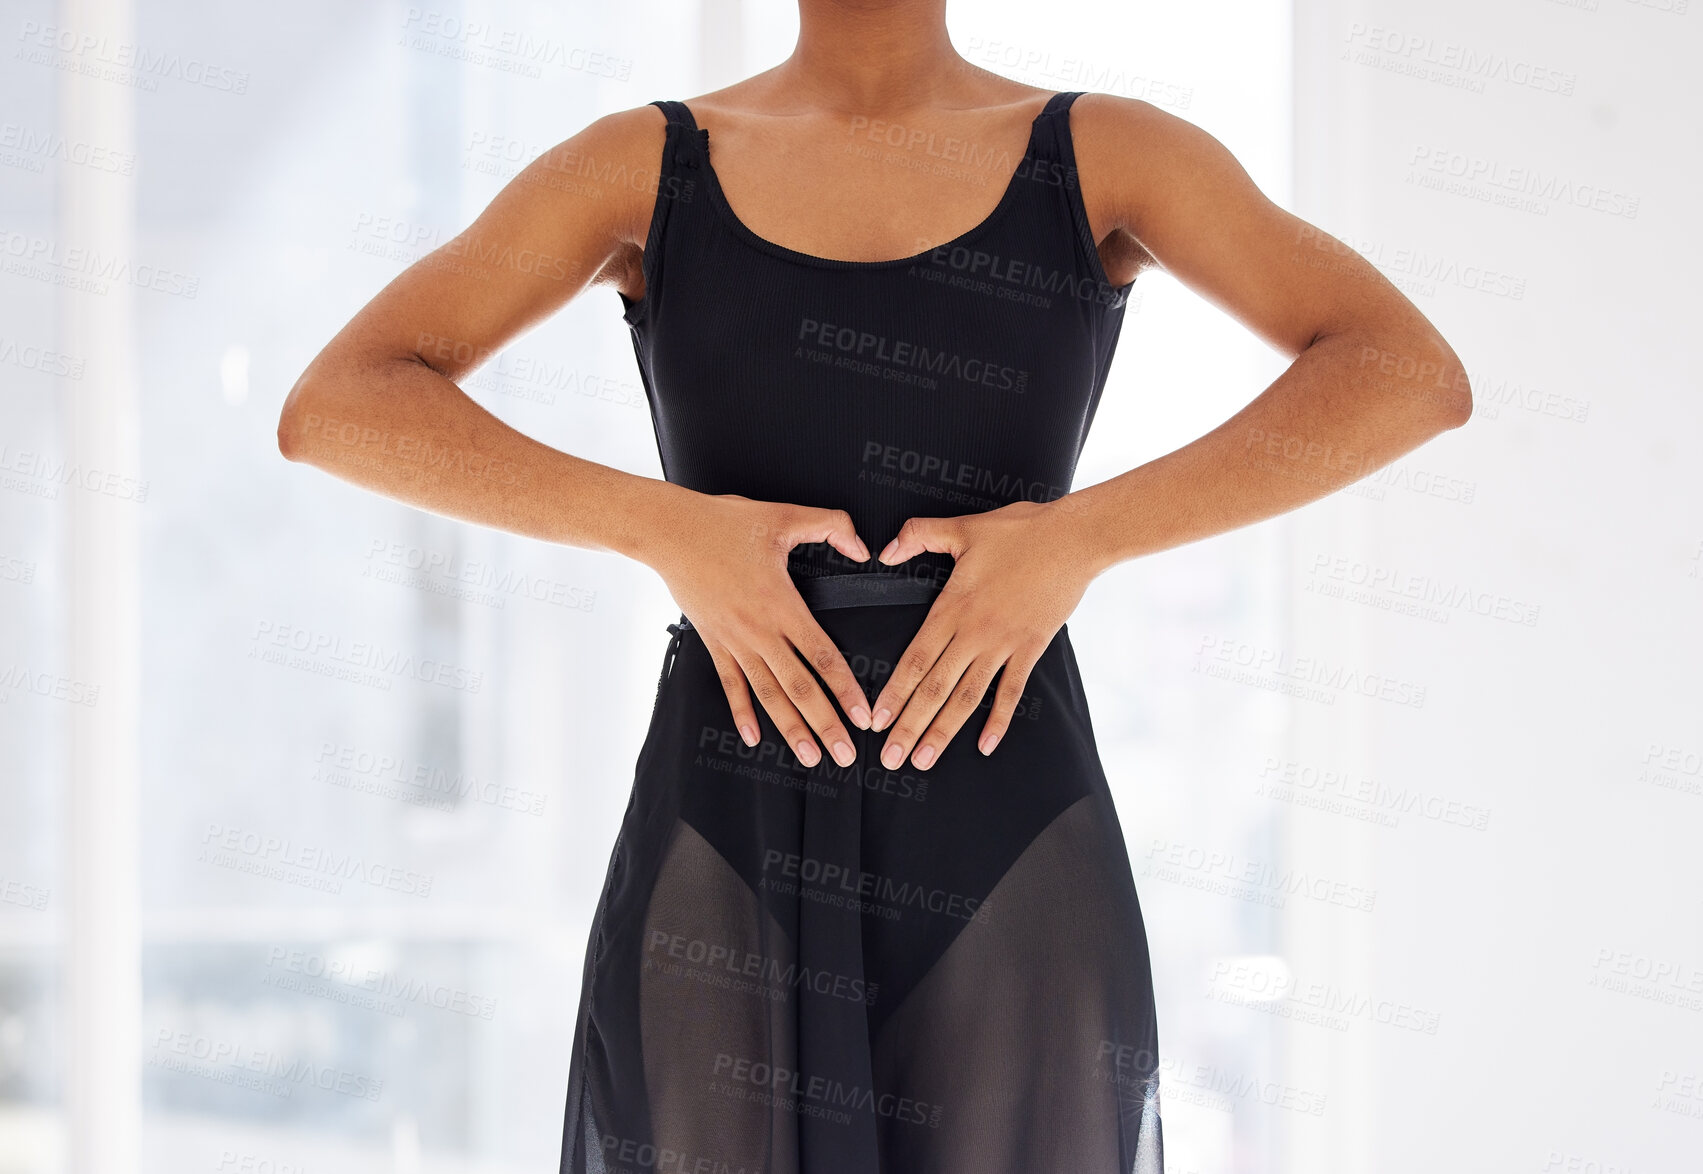 Buy stock photo Shot of a ballerina creating a heart shape with her fingers over her stomach